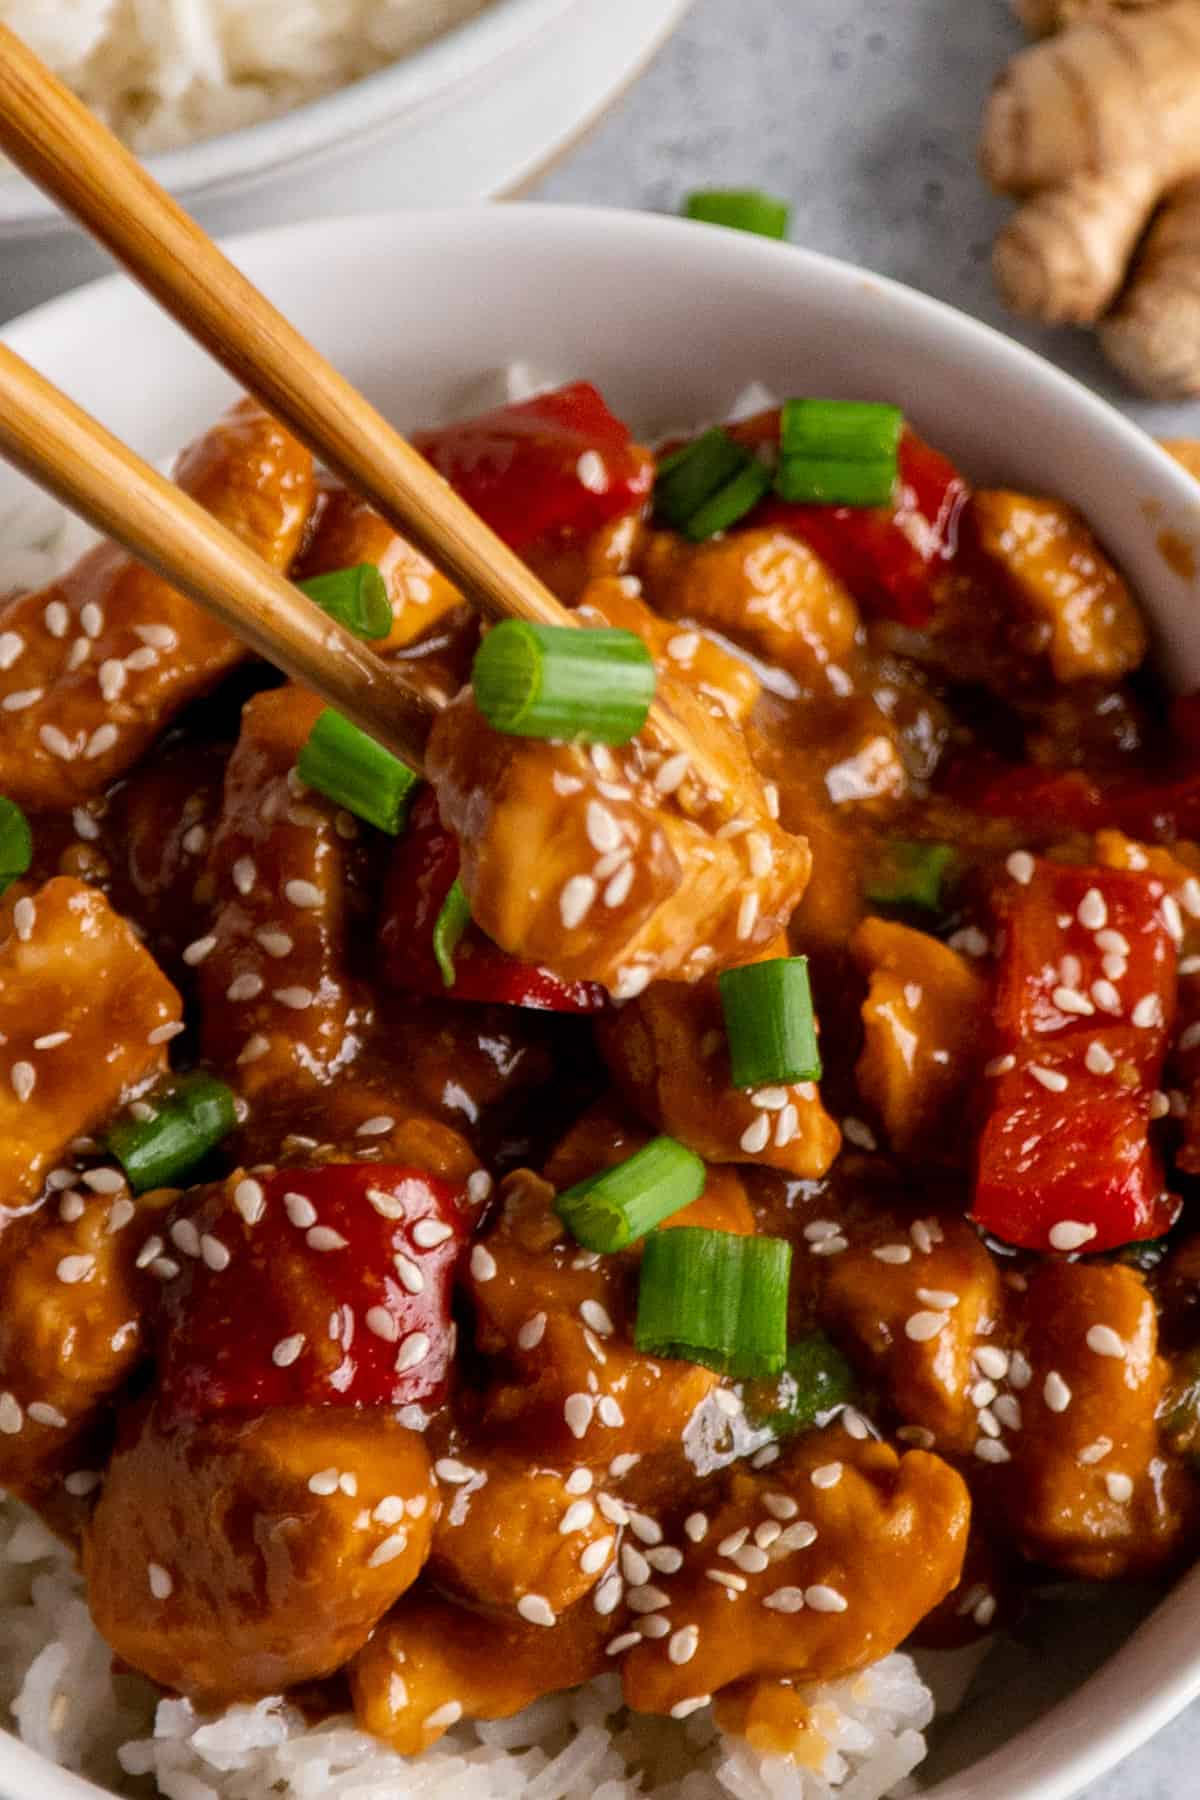 Chopsticks holding a piece of sesame chicken garnished with green onion.